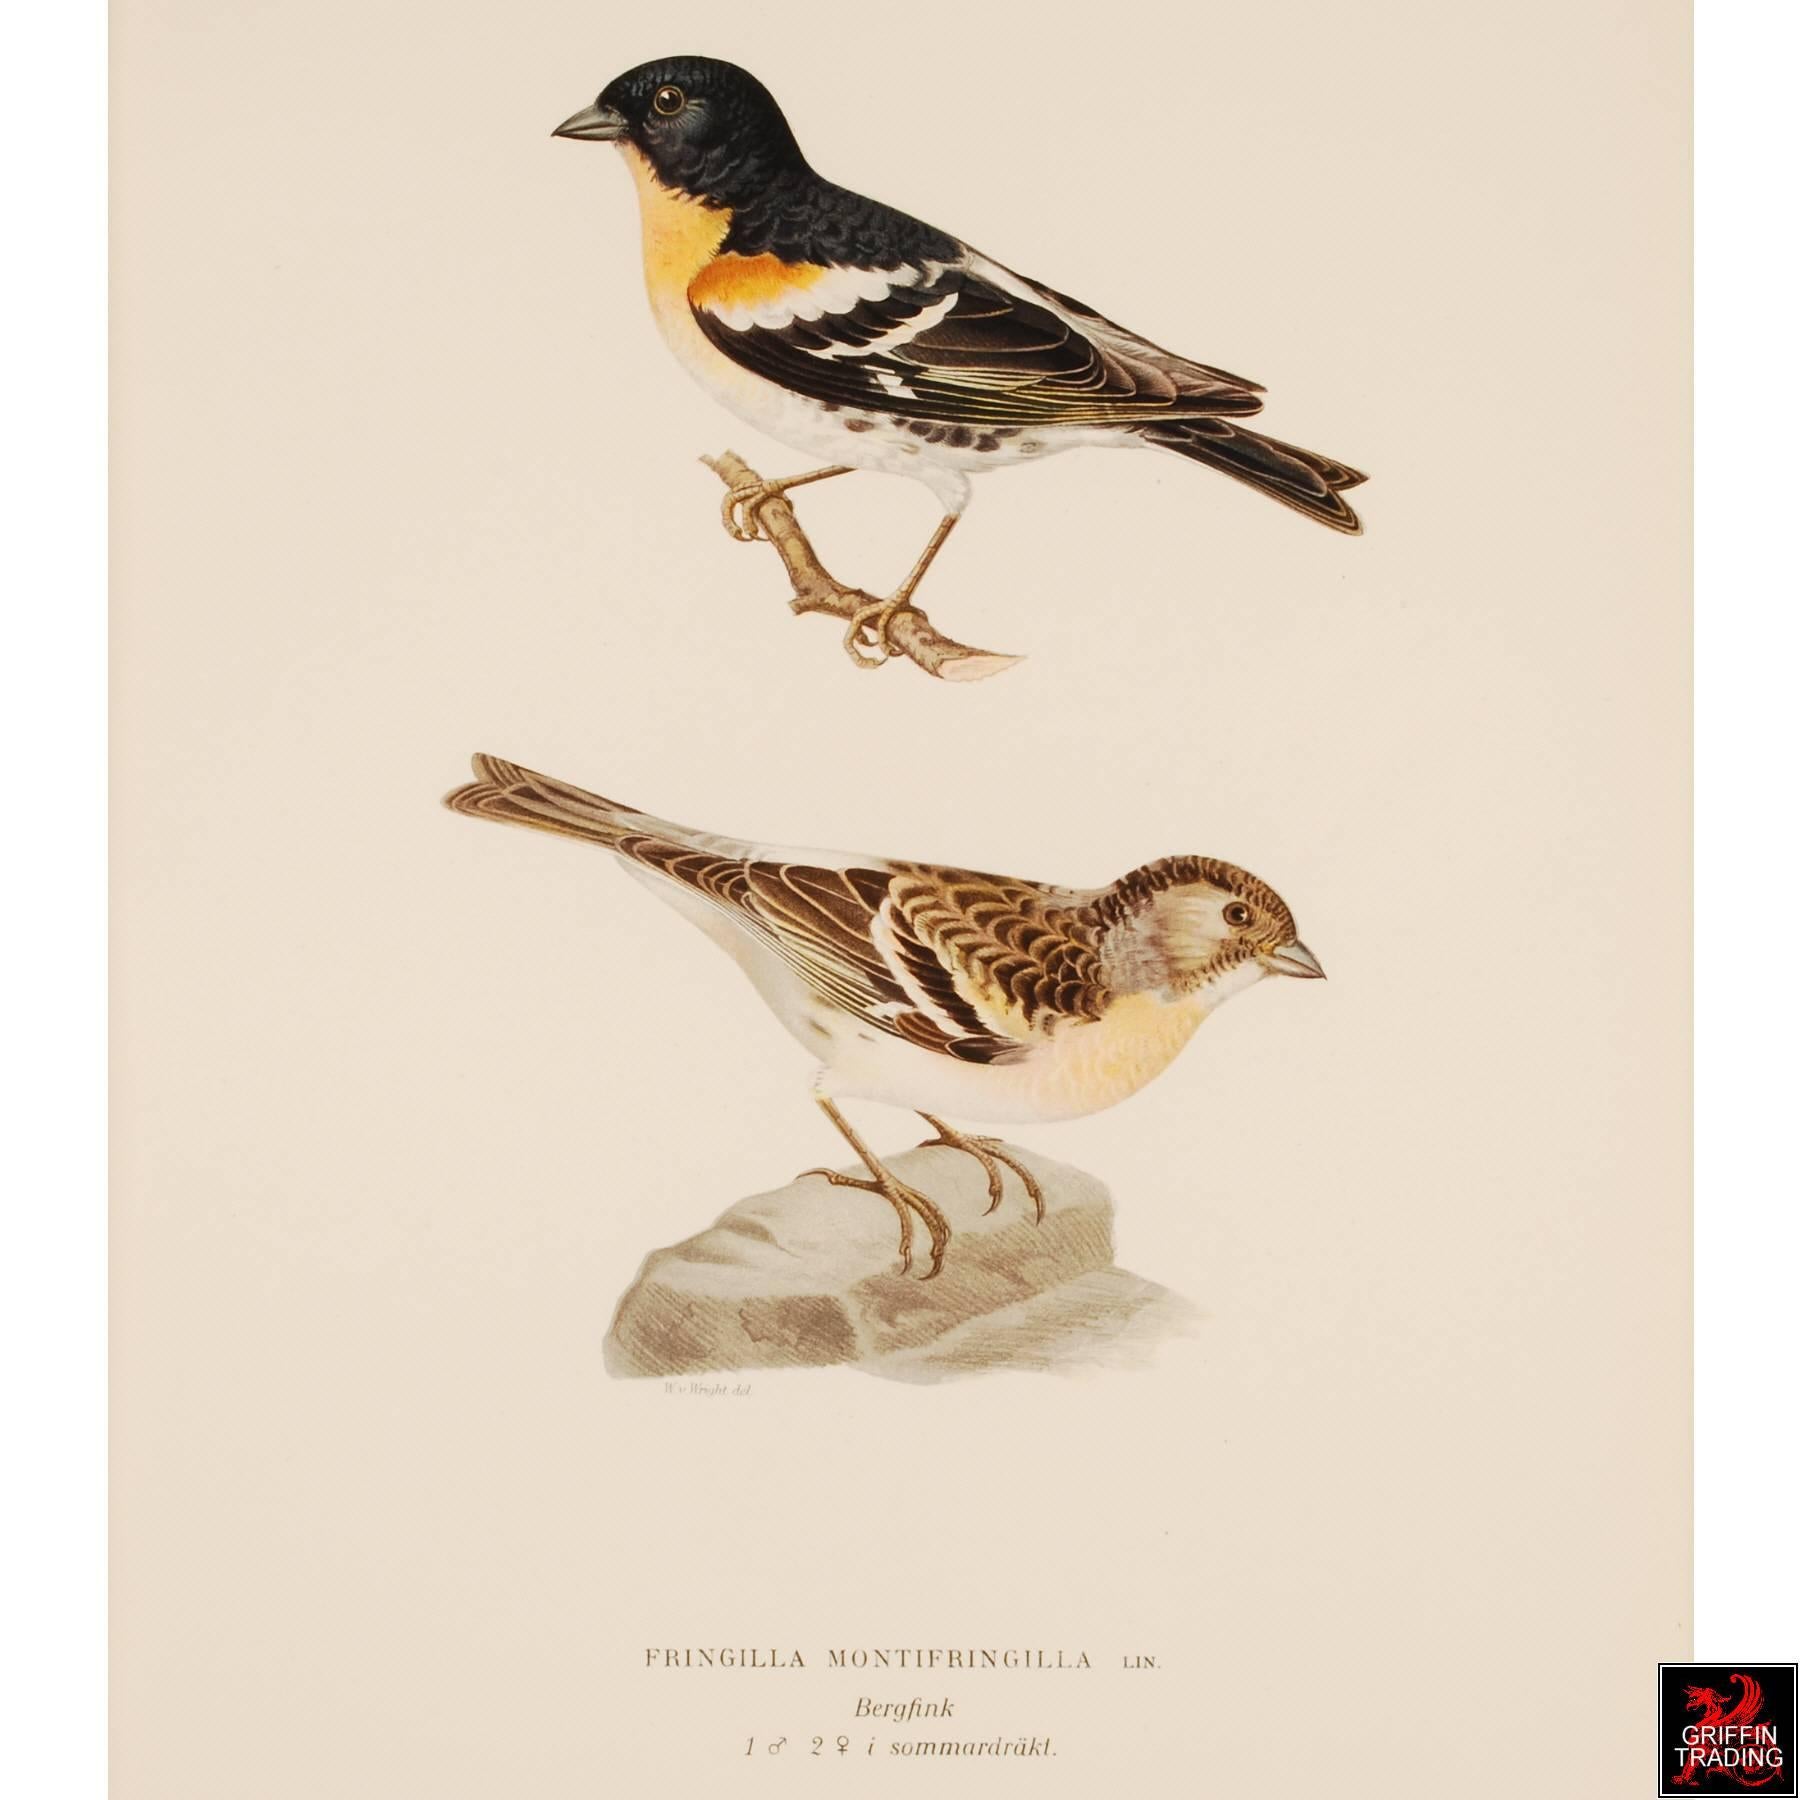 This is a superb collection of Birds by the Finnish artists Magnus von Wright (1805-1868) and Wilhelm von Wright (1810-1887). The color rich images were done around 1900 by the Swedish Lithographer A. Bortzells in Stockholm. The Wrights were well